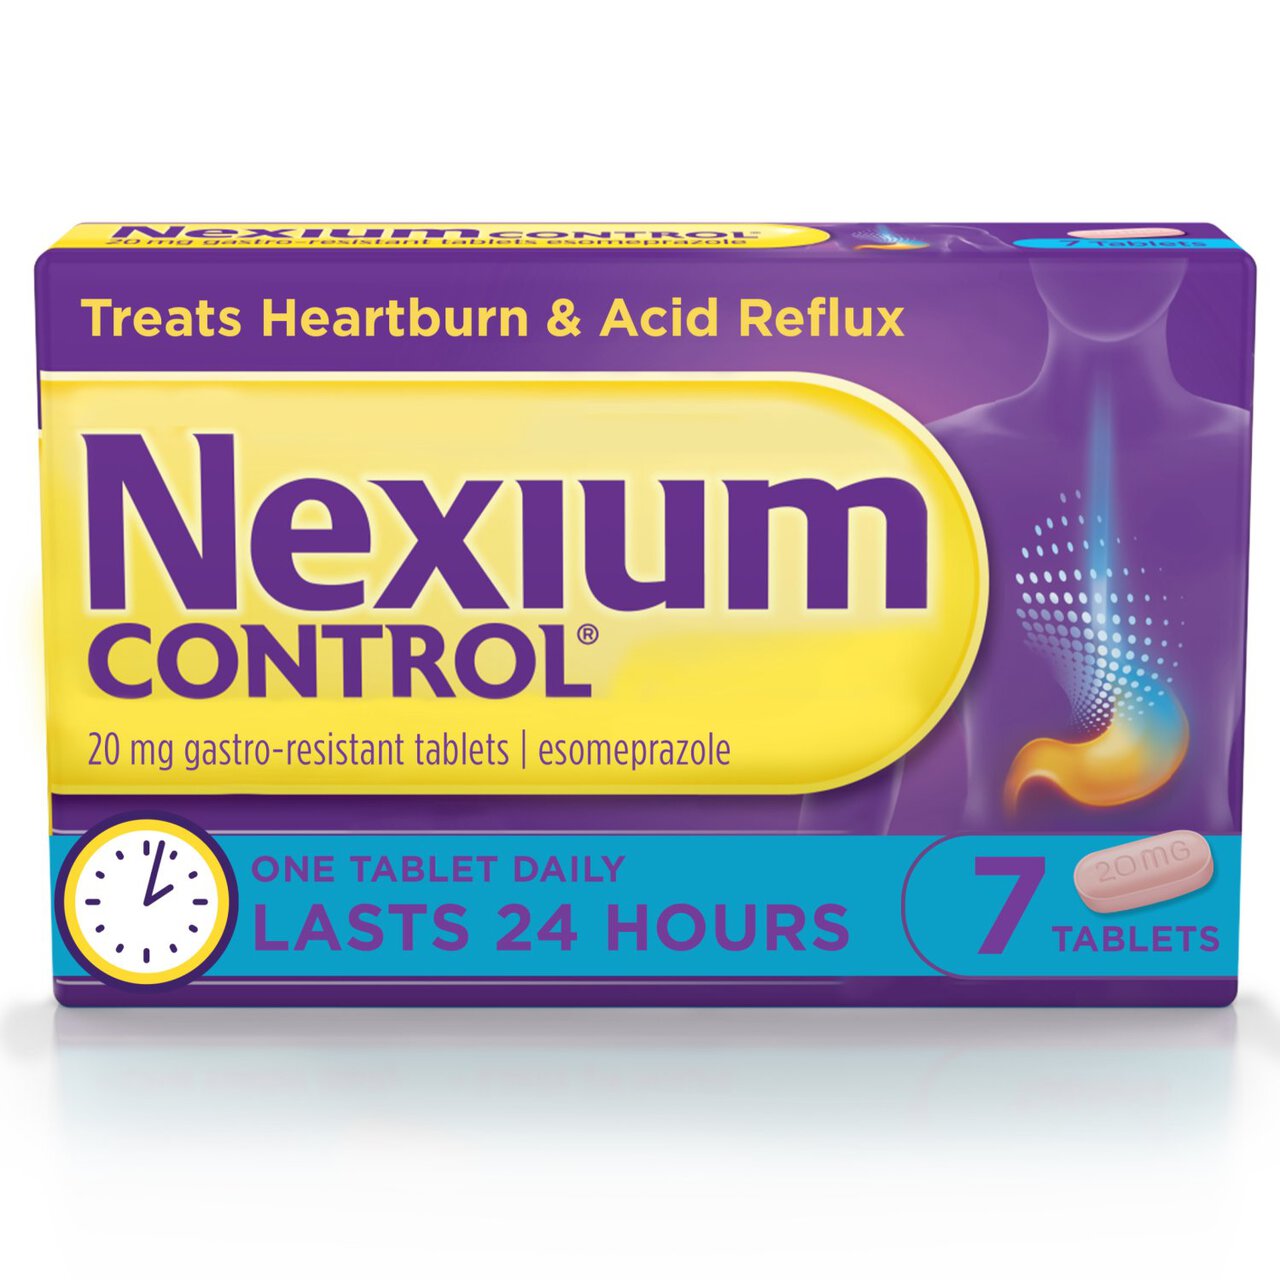 Nexium Control Heartburn & Indigestion 24 Hour Relief 20mg 7 Tablets 7 per pack